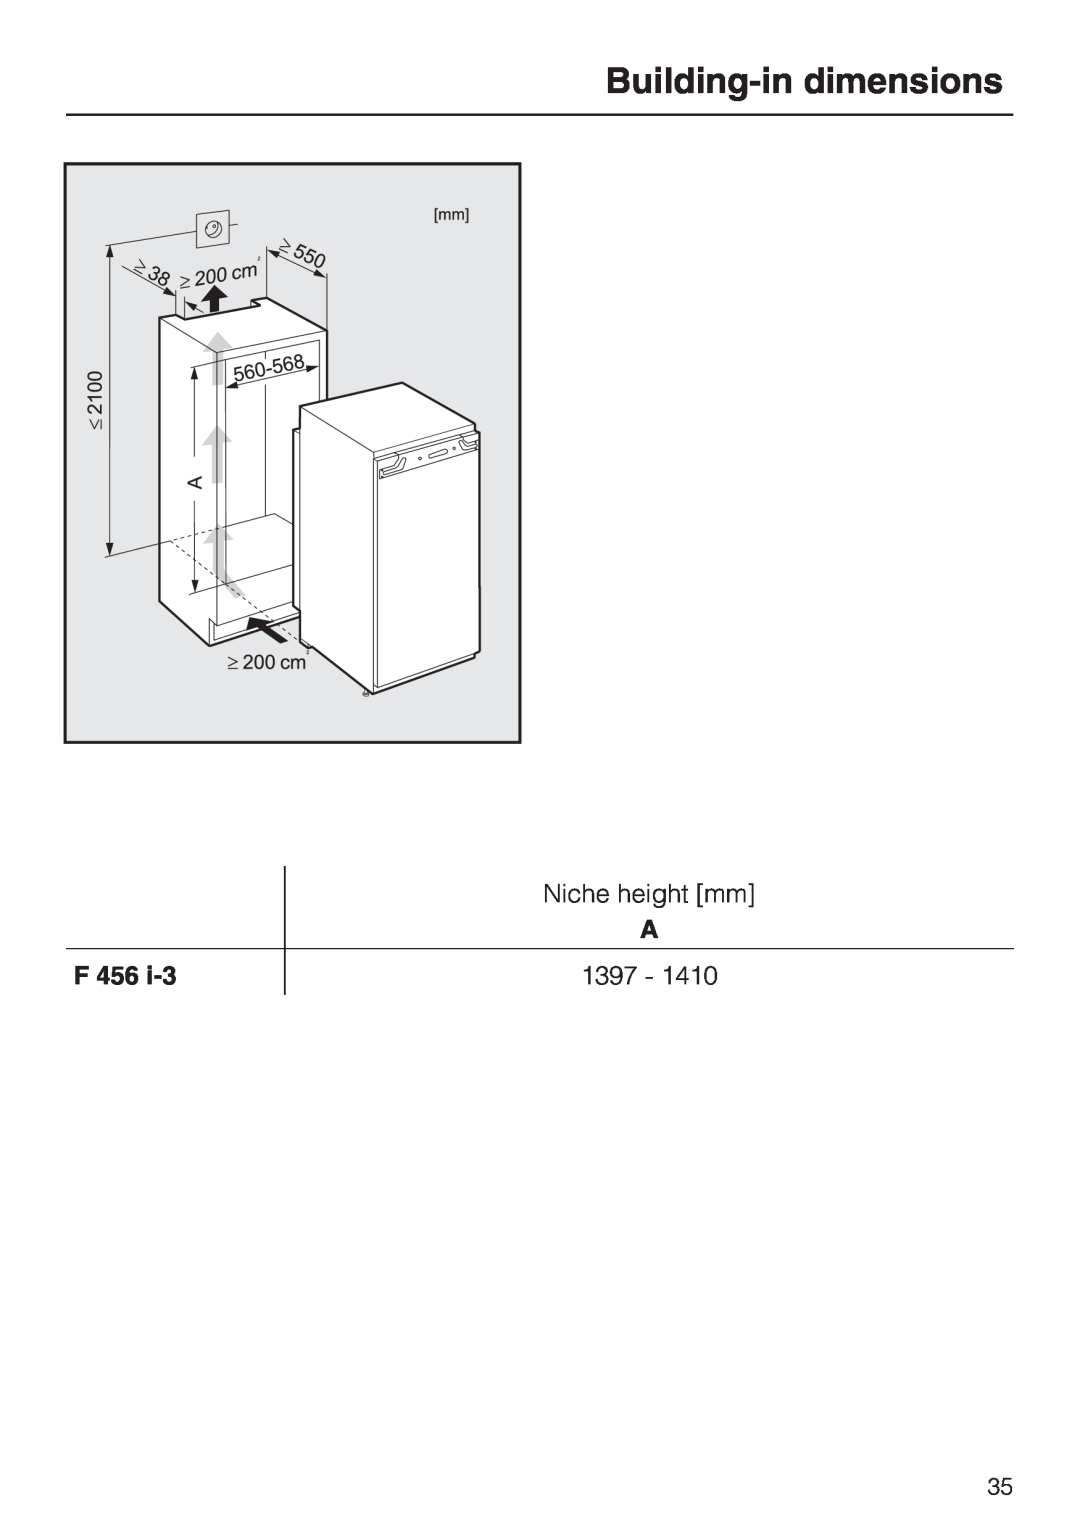 Miele F 456 i-3 installation instructions Building-indimensions 